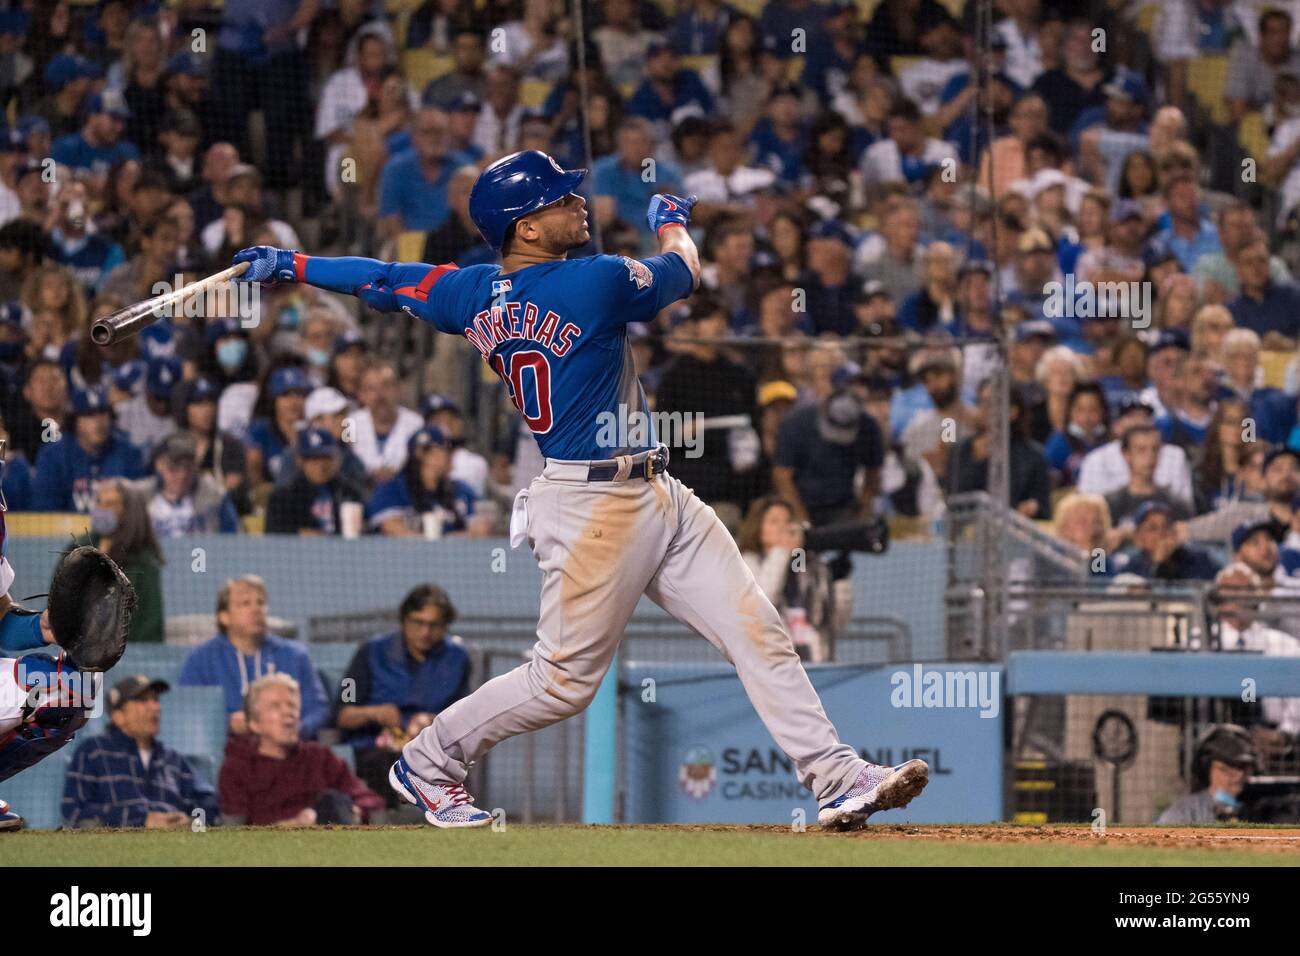 Chicago Cubs catcher Willson Contreras (40) strikes out during a MLB spring  training game, Saturday, Mar. 13, 2021, in Surprise, Ariz. (Brandon  Sloter/Image of Sport) Photo via Newscom Stock Photo - Alamy